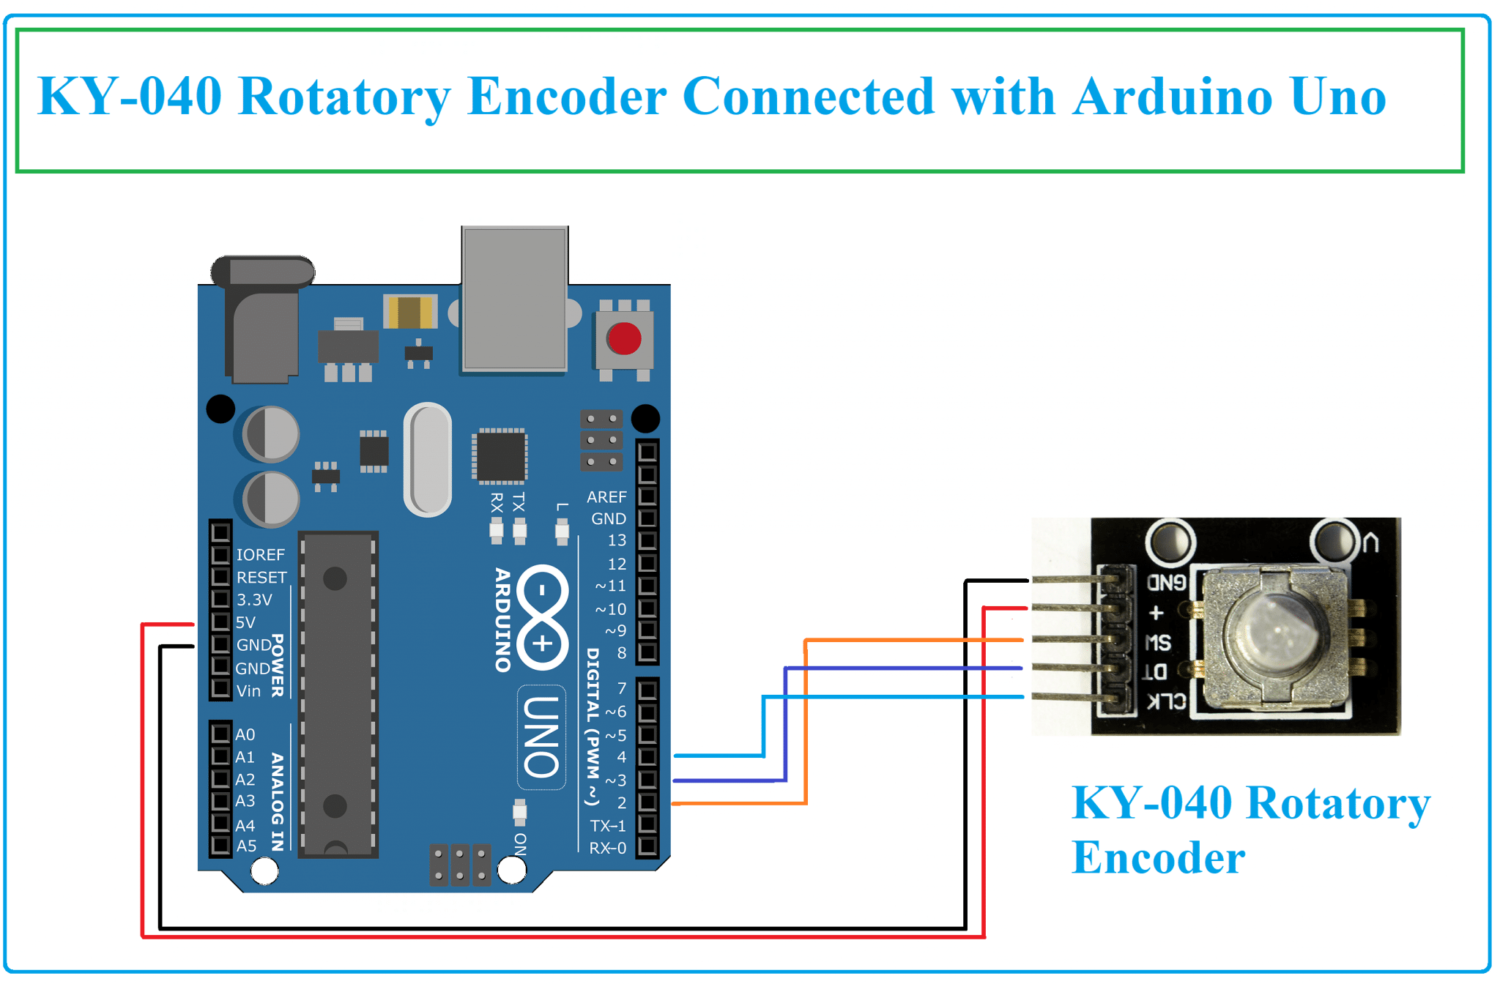 Connection of rotatory encoder with Arduino